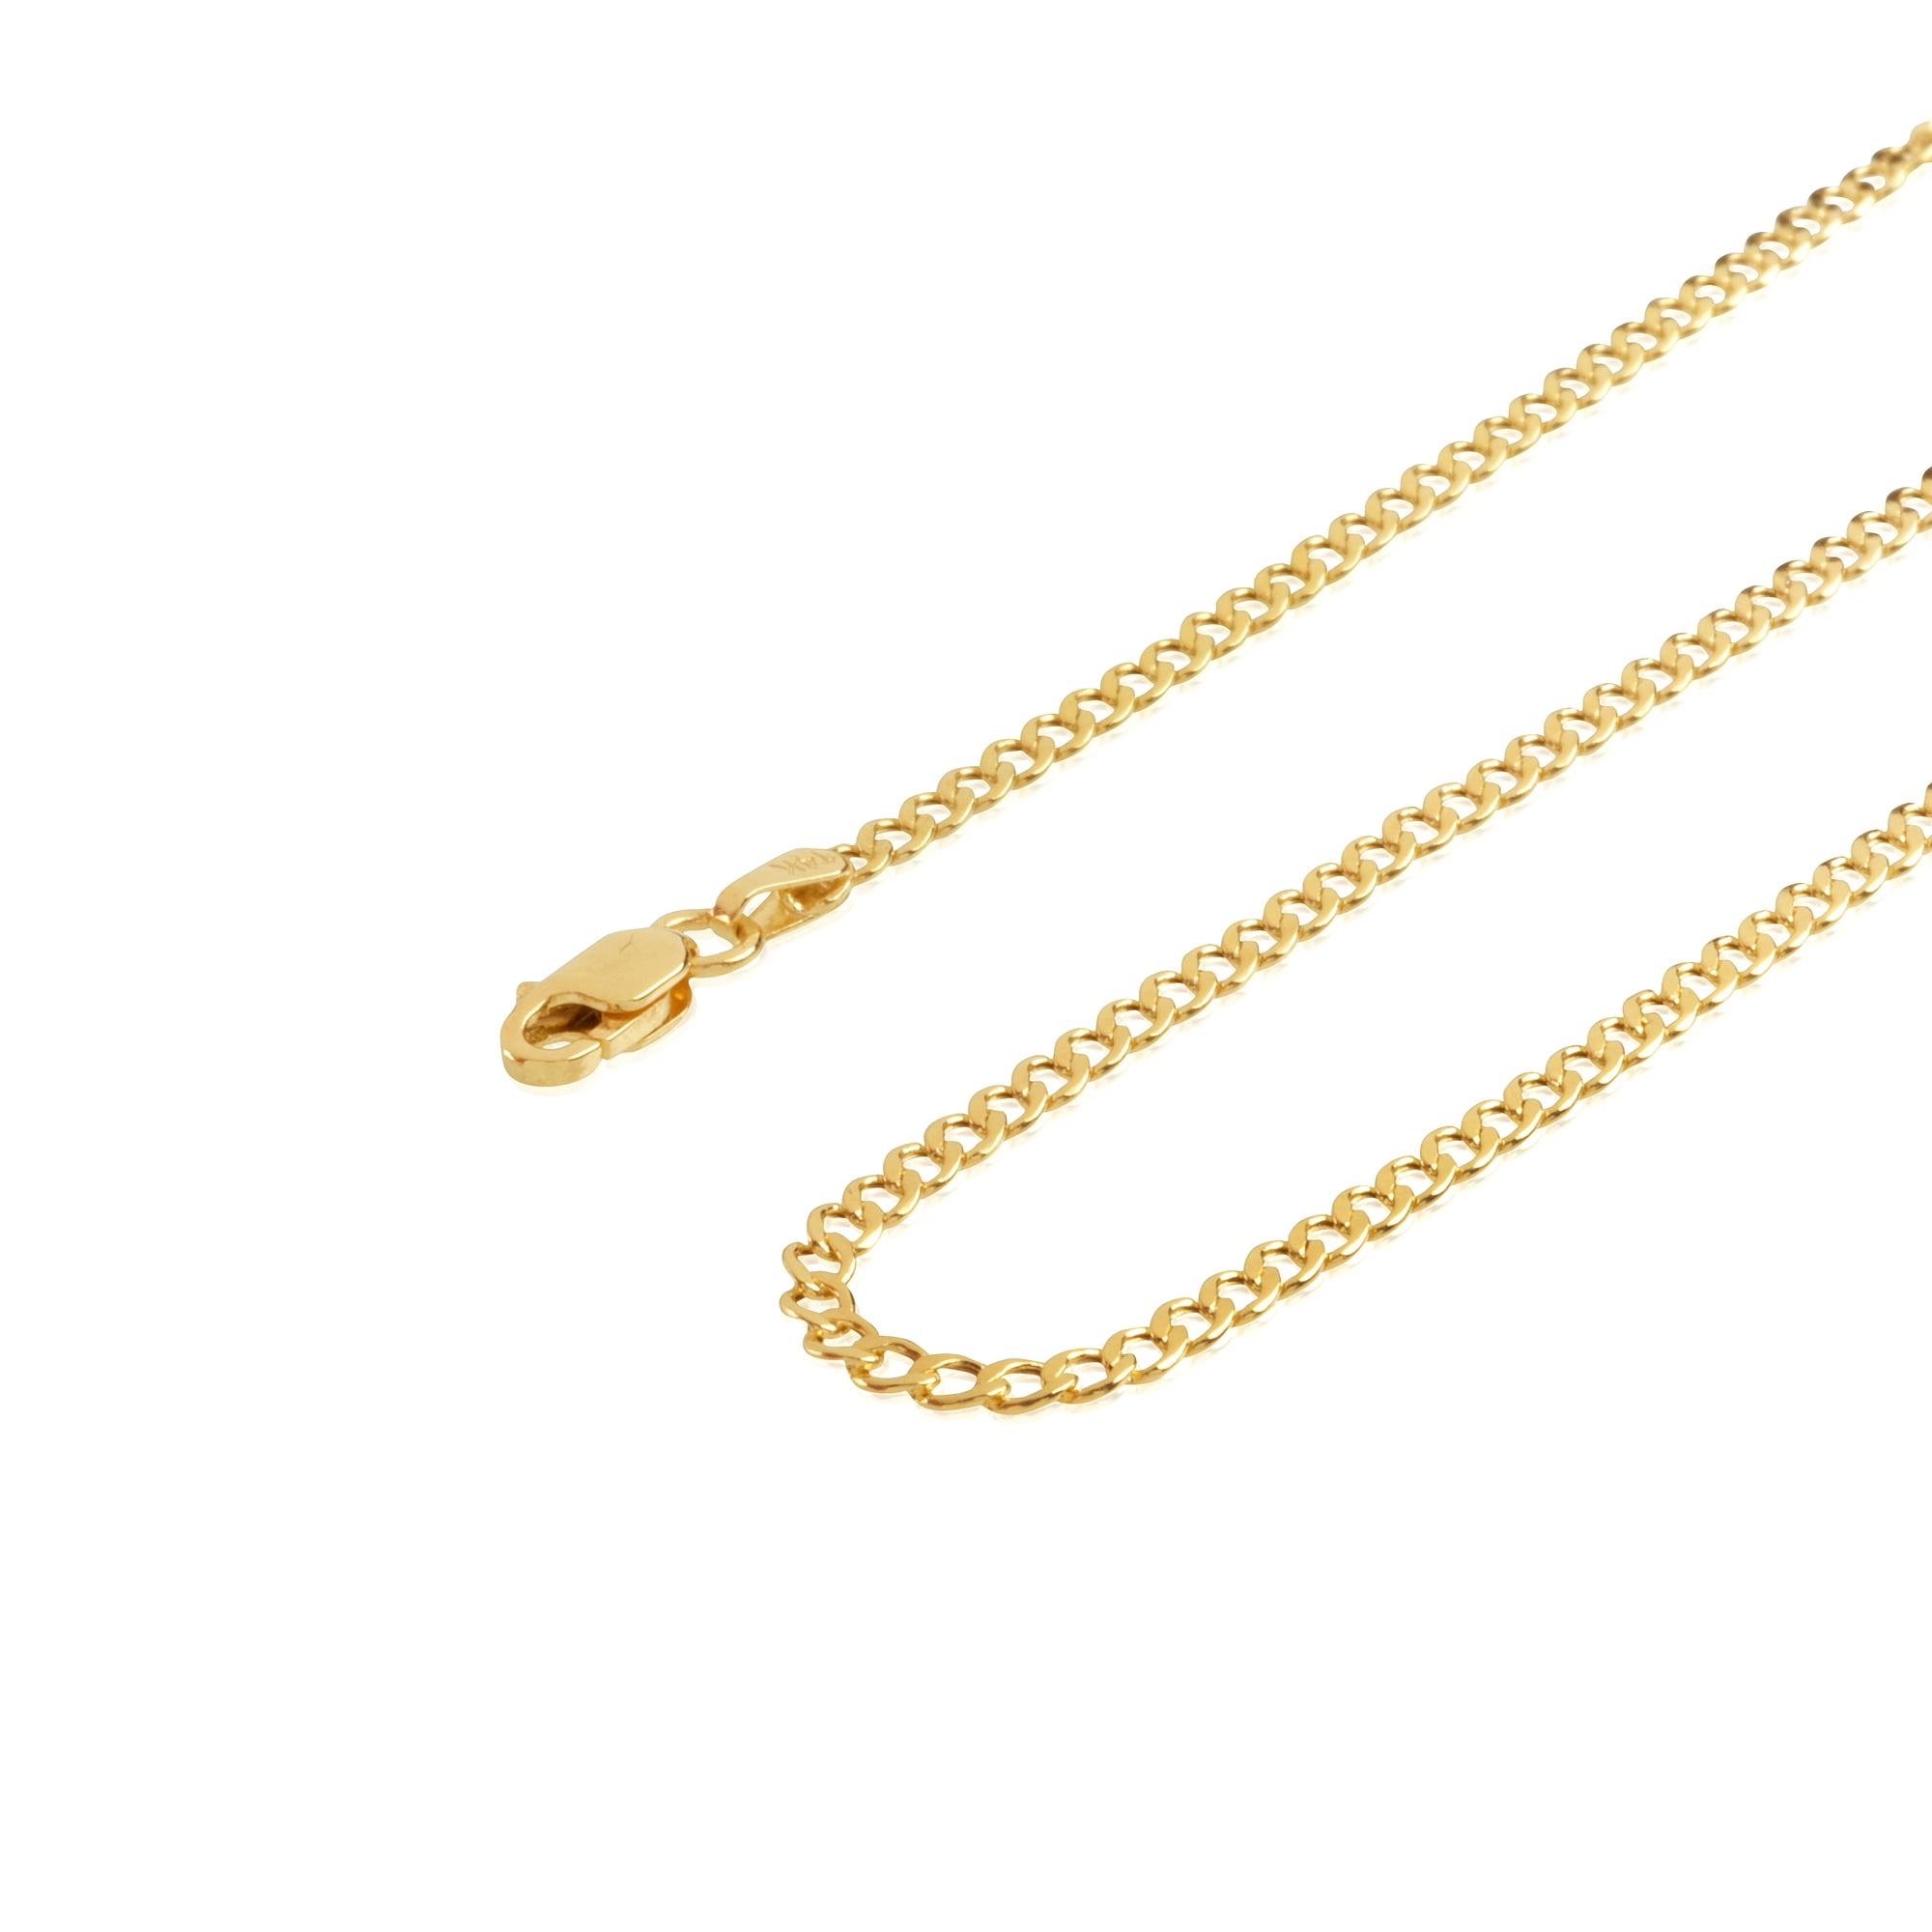 1.2mm 14k Gold Curb or Cuban Chain Necklace with Spring Ring 